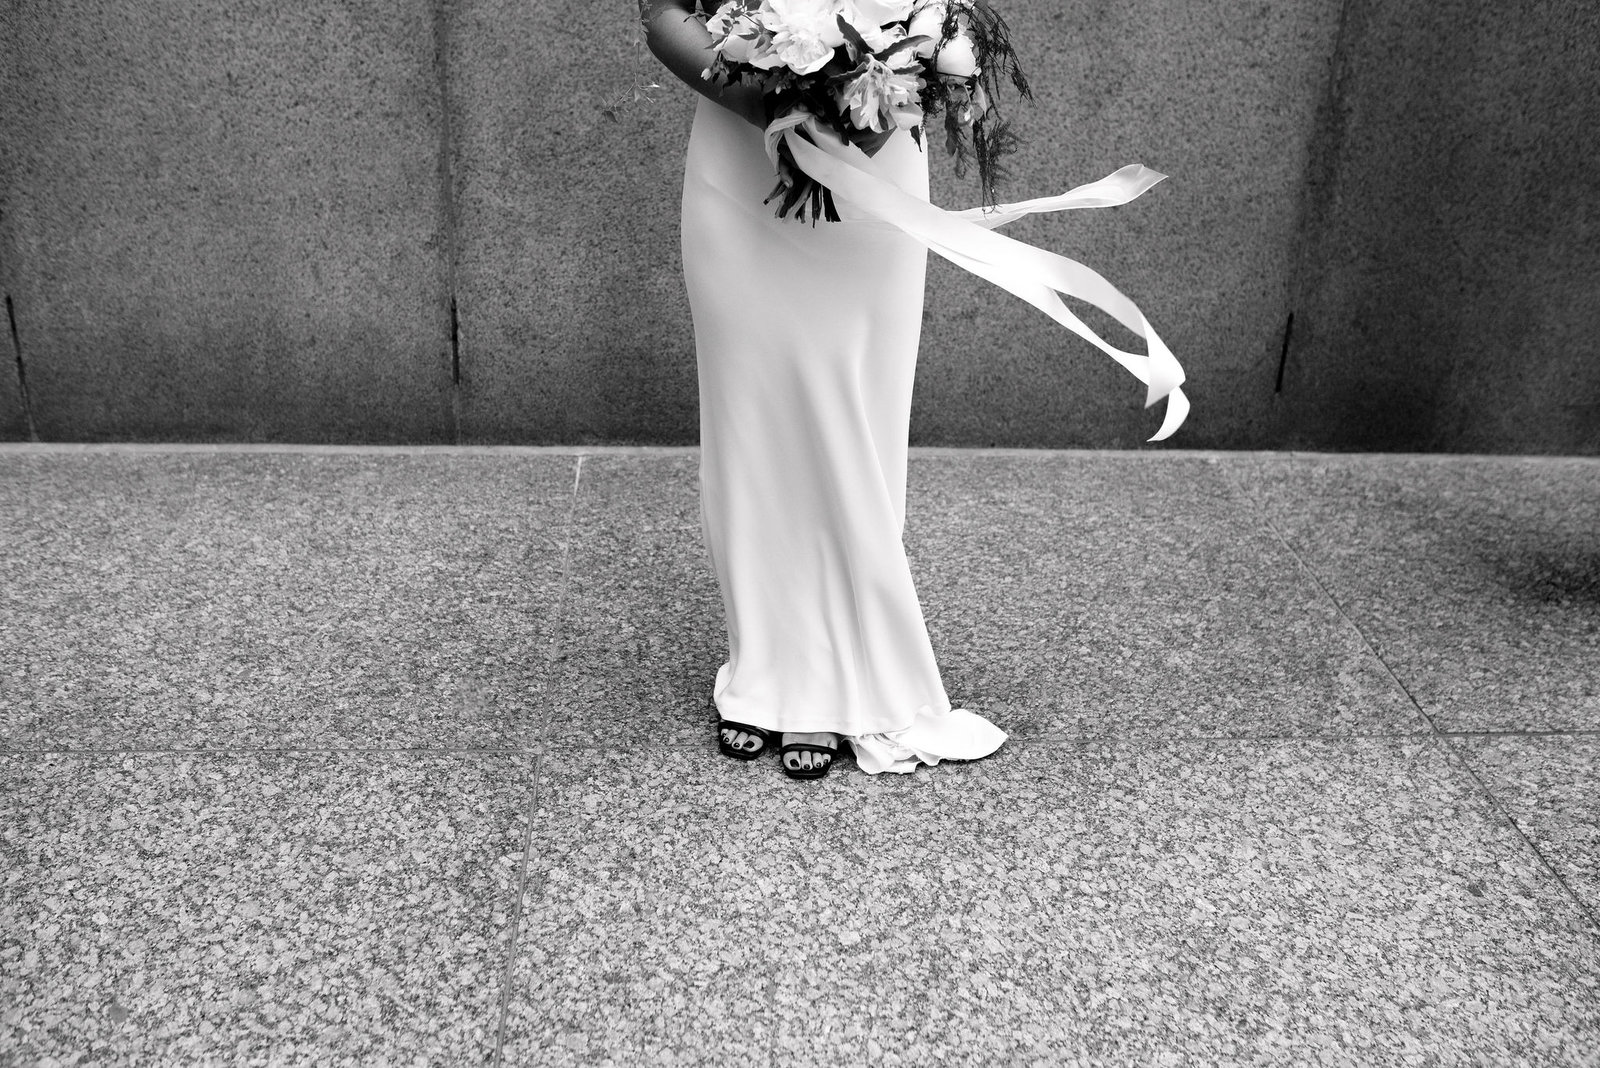 Candid Editorial Bride Moment in between portraits in Financial District Downtown Toronto Wedding Photographer Jacqueline James Photography